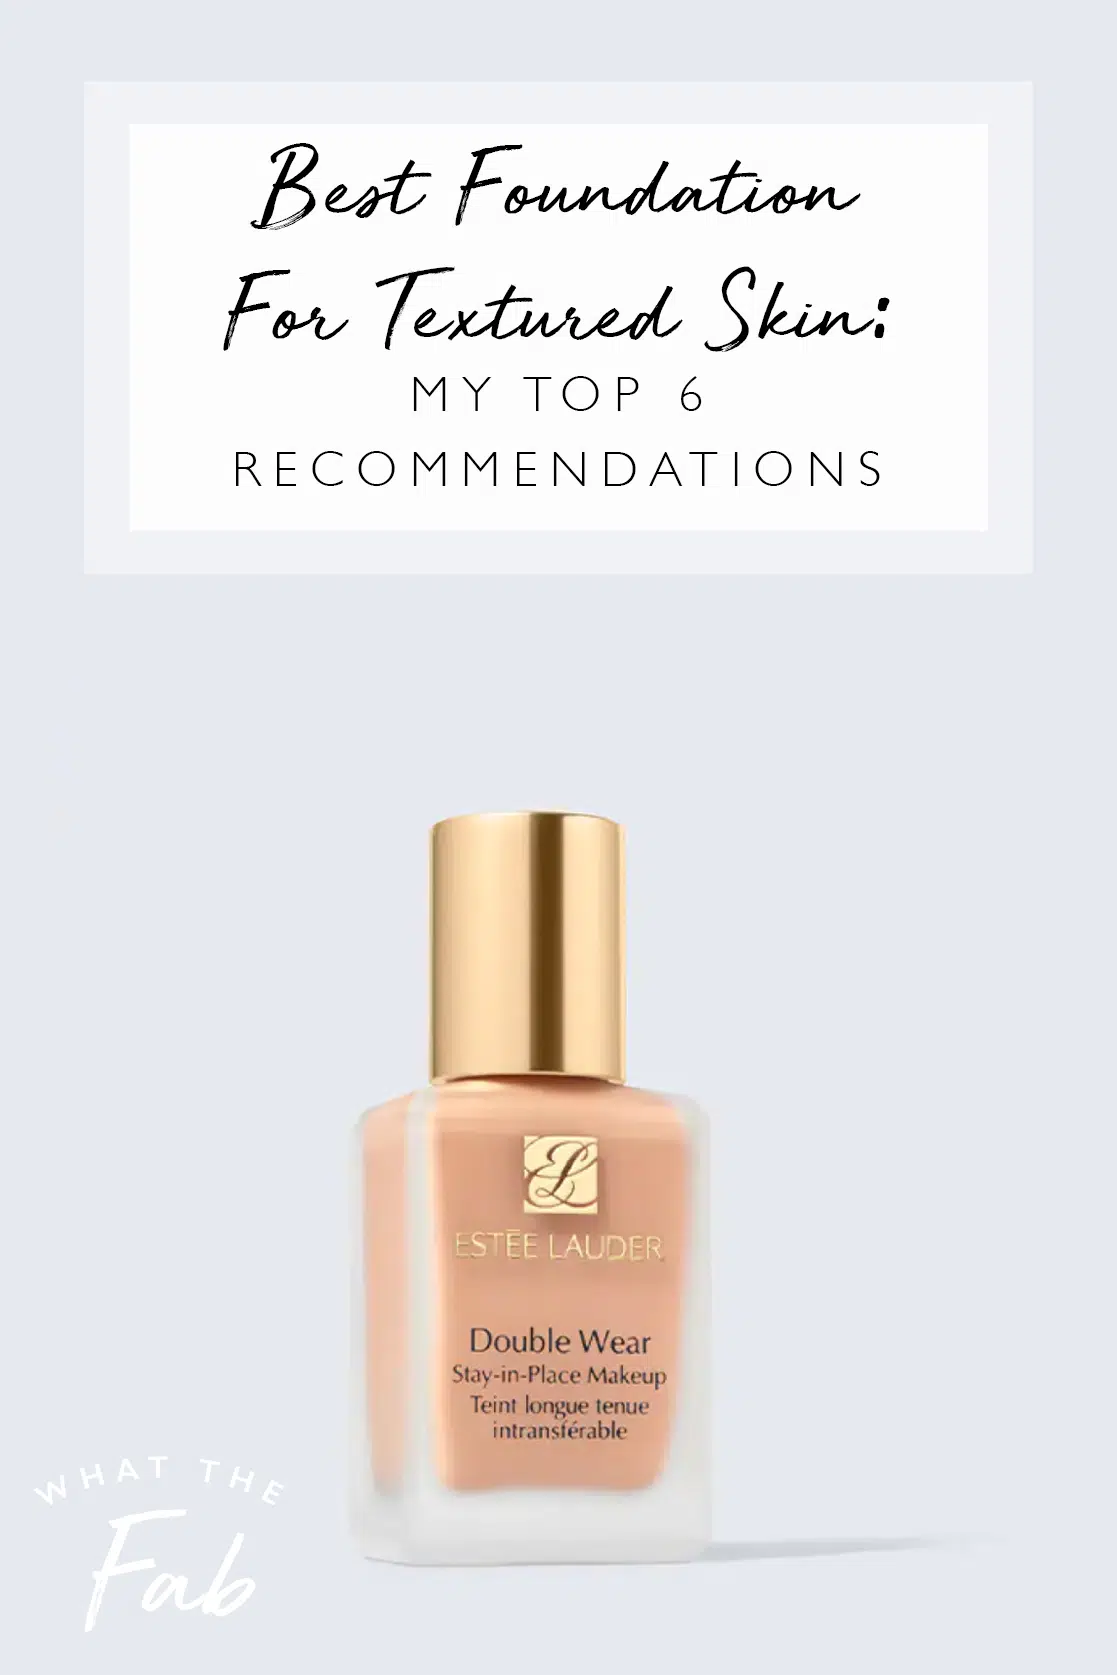 These Are the 7 Best Foundations for Asian Skin Tones